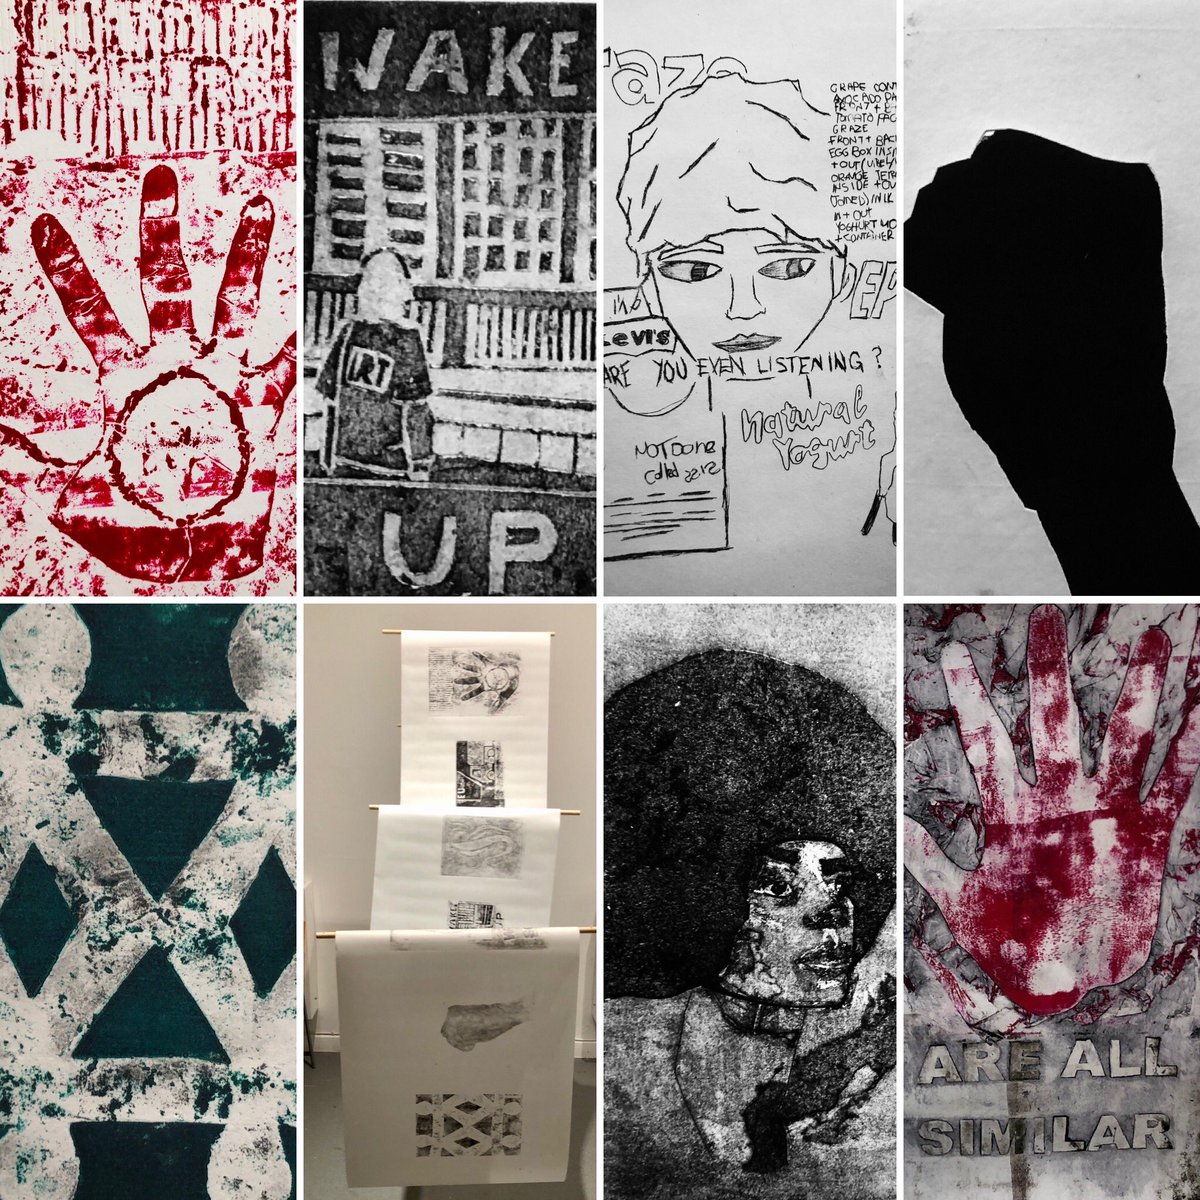 Here is some of the work on display @ikongallery by Ikon youth program, who artist Taiba Akhtar and I have had the pleasure working with since January, they have created an exhibition of work inspired by the theme Protest, it’s on display in the events room until sun 24th March